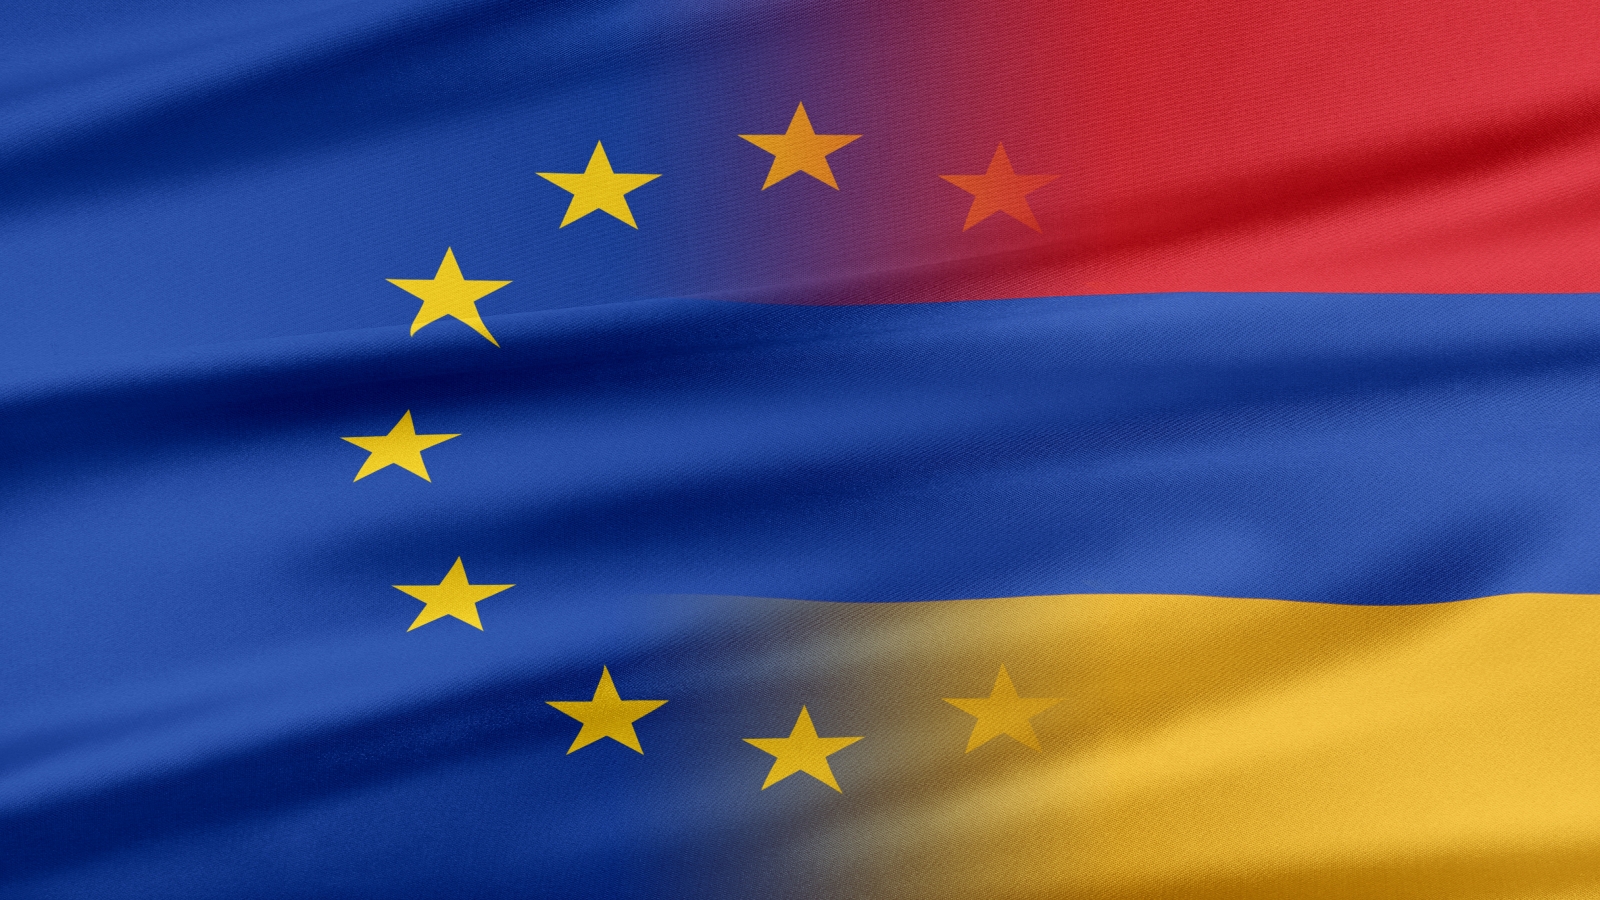 ‘European Union expects Armenian authorities to fully respect this right and to apply the law in a fair and proportionate manner’